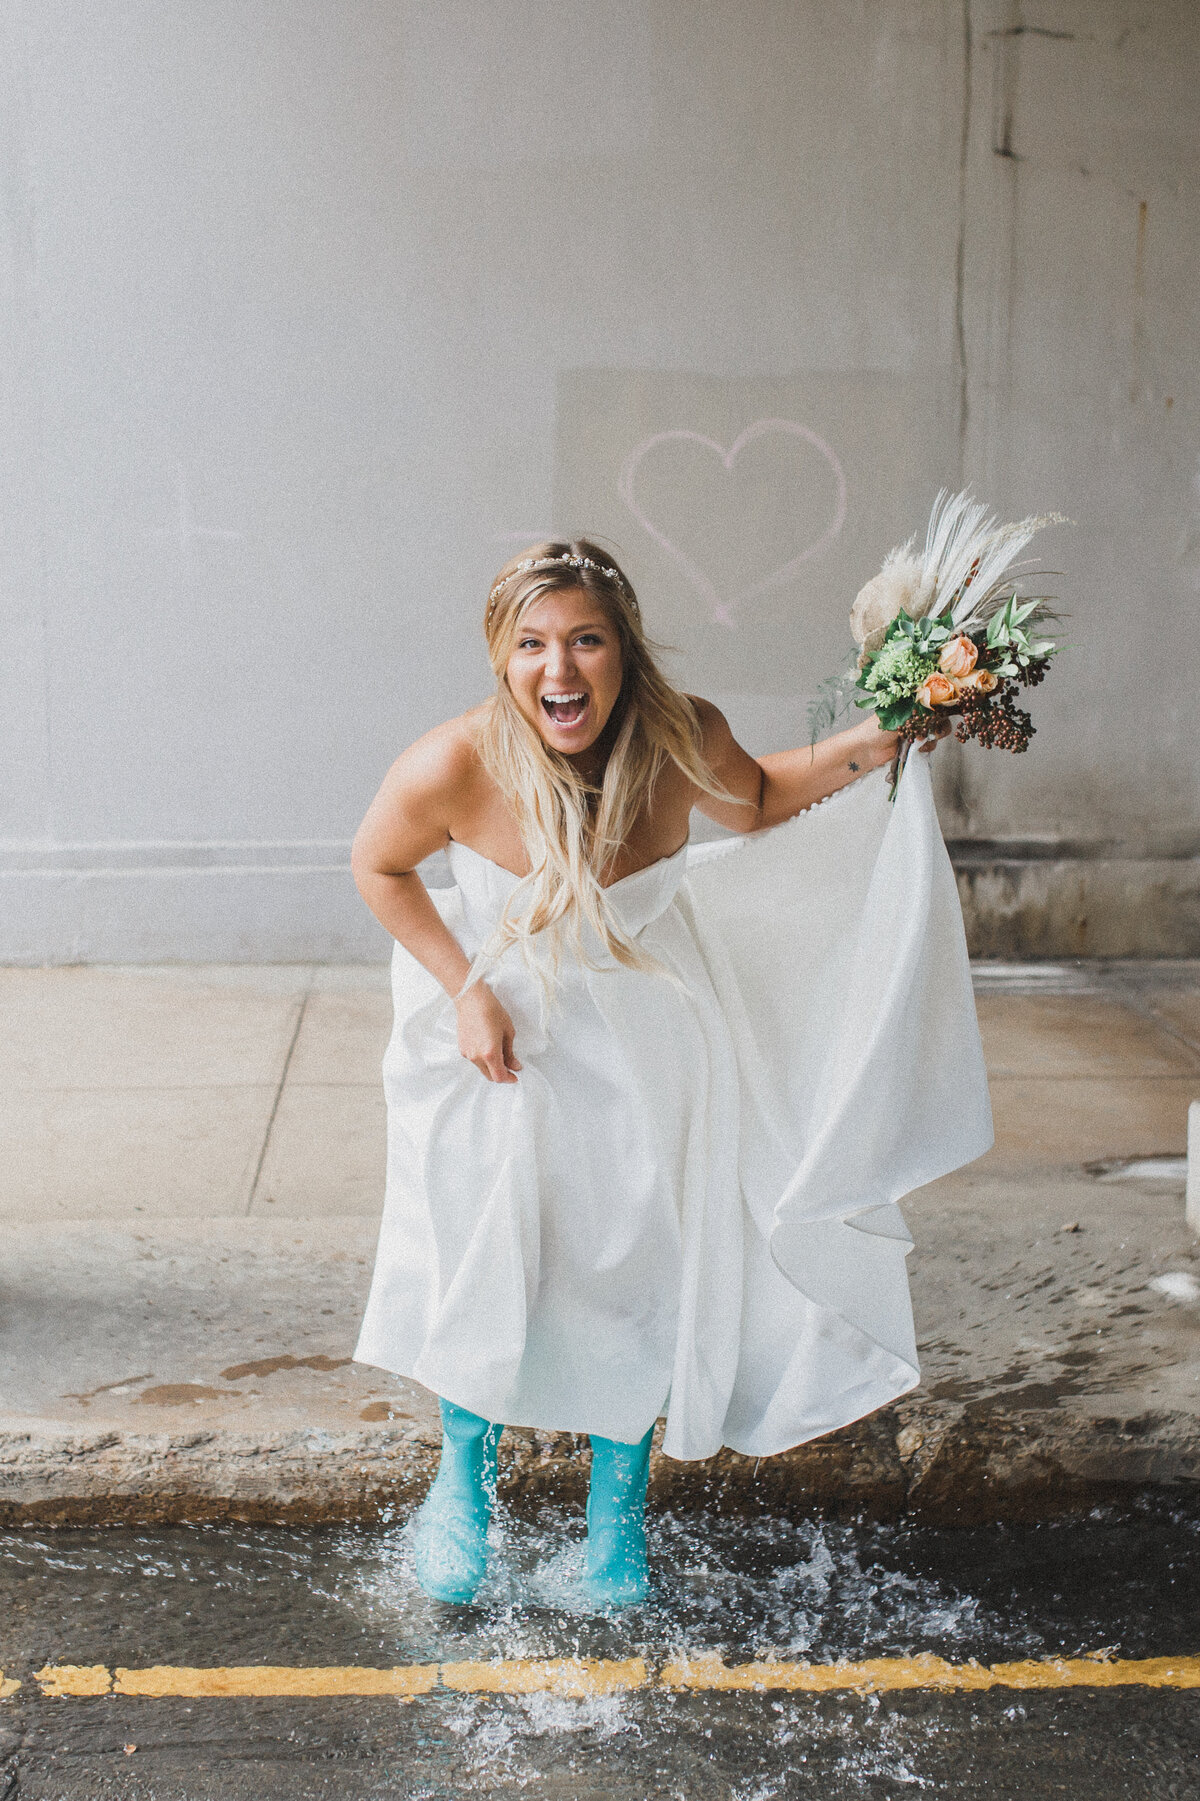 Antonia Baker Experience - bride laughing in puddle